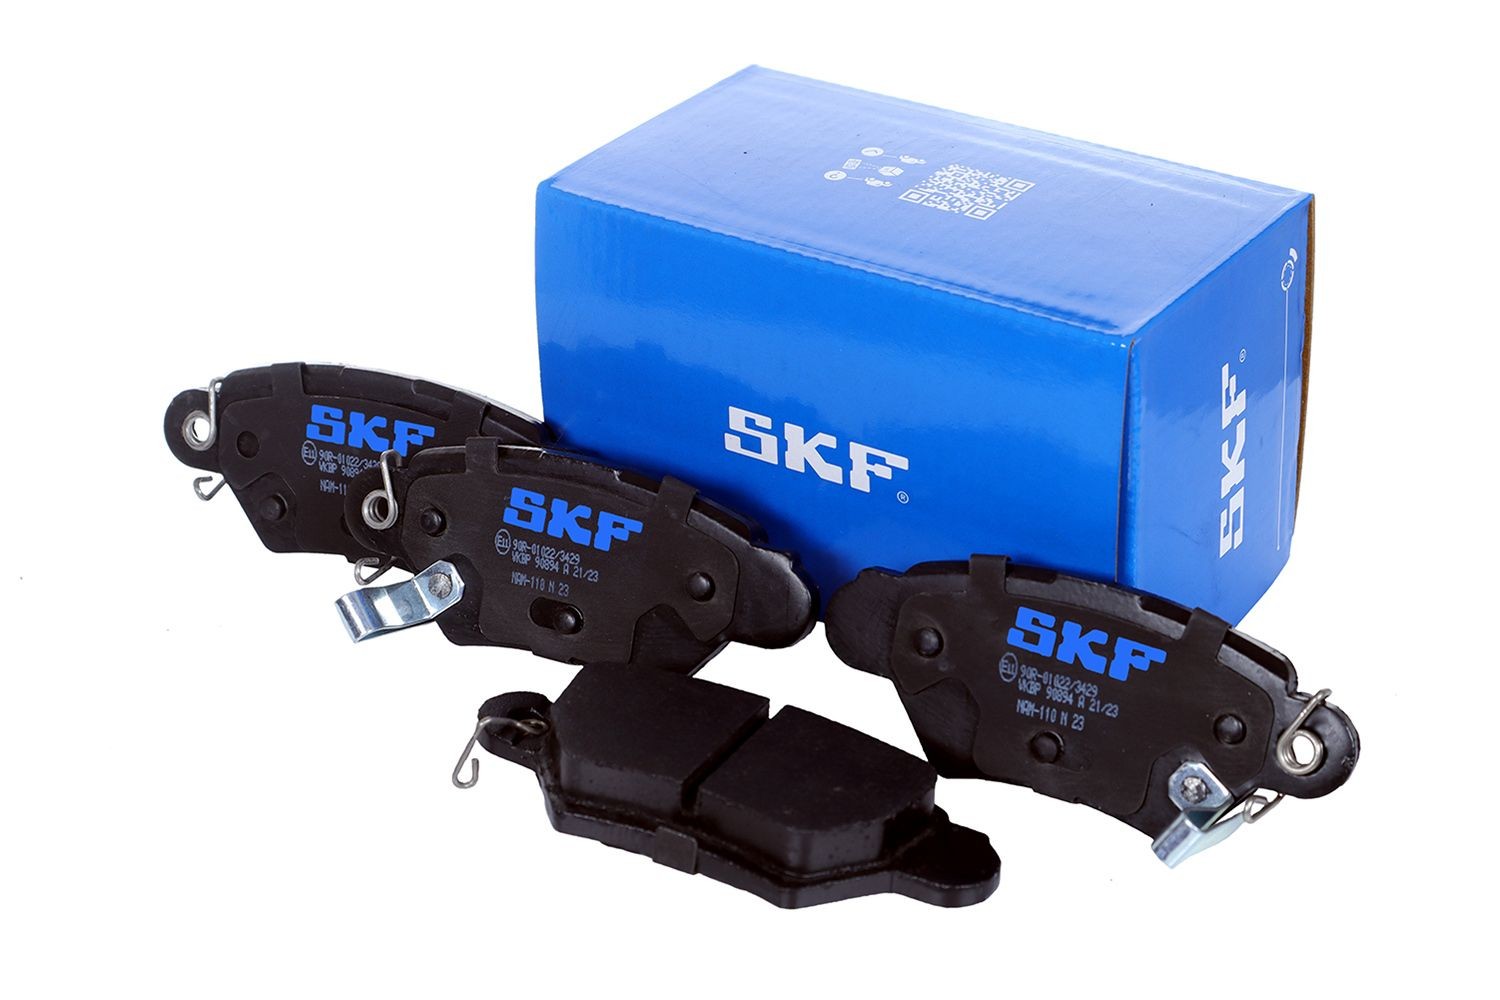 23258 SKF VKBP90894A Brake discs and pads set 09117717